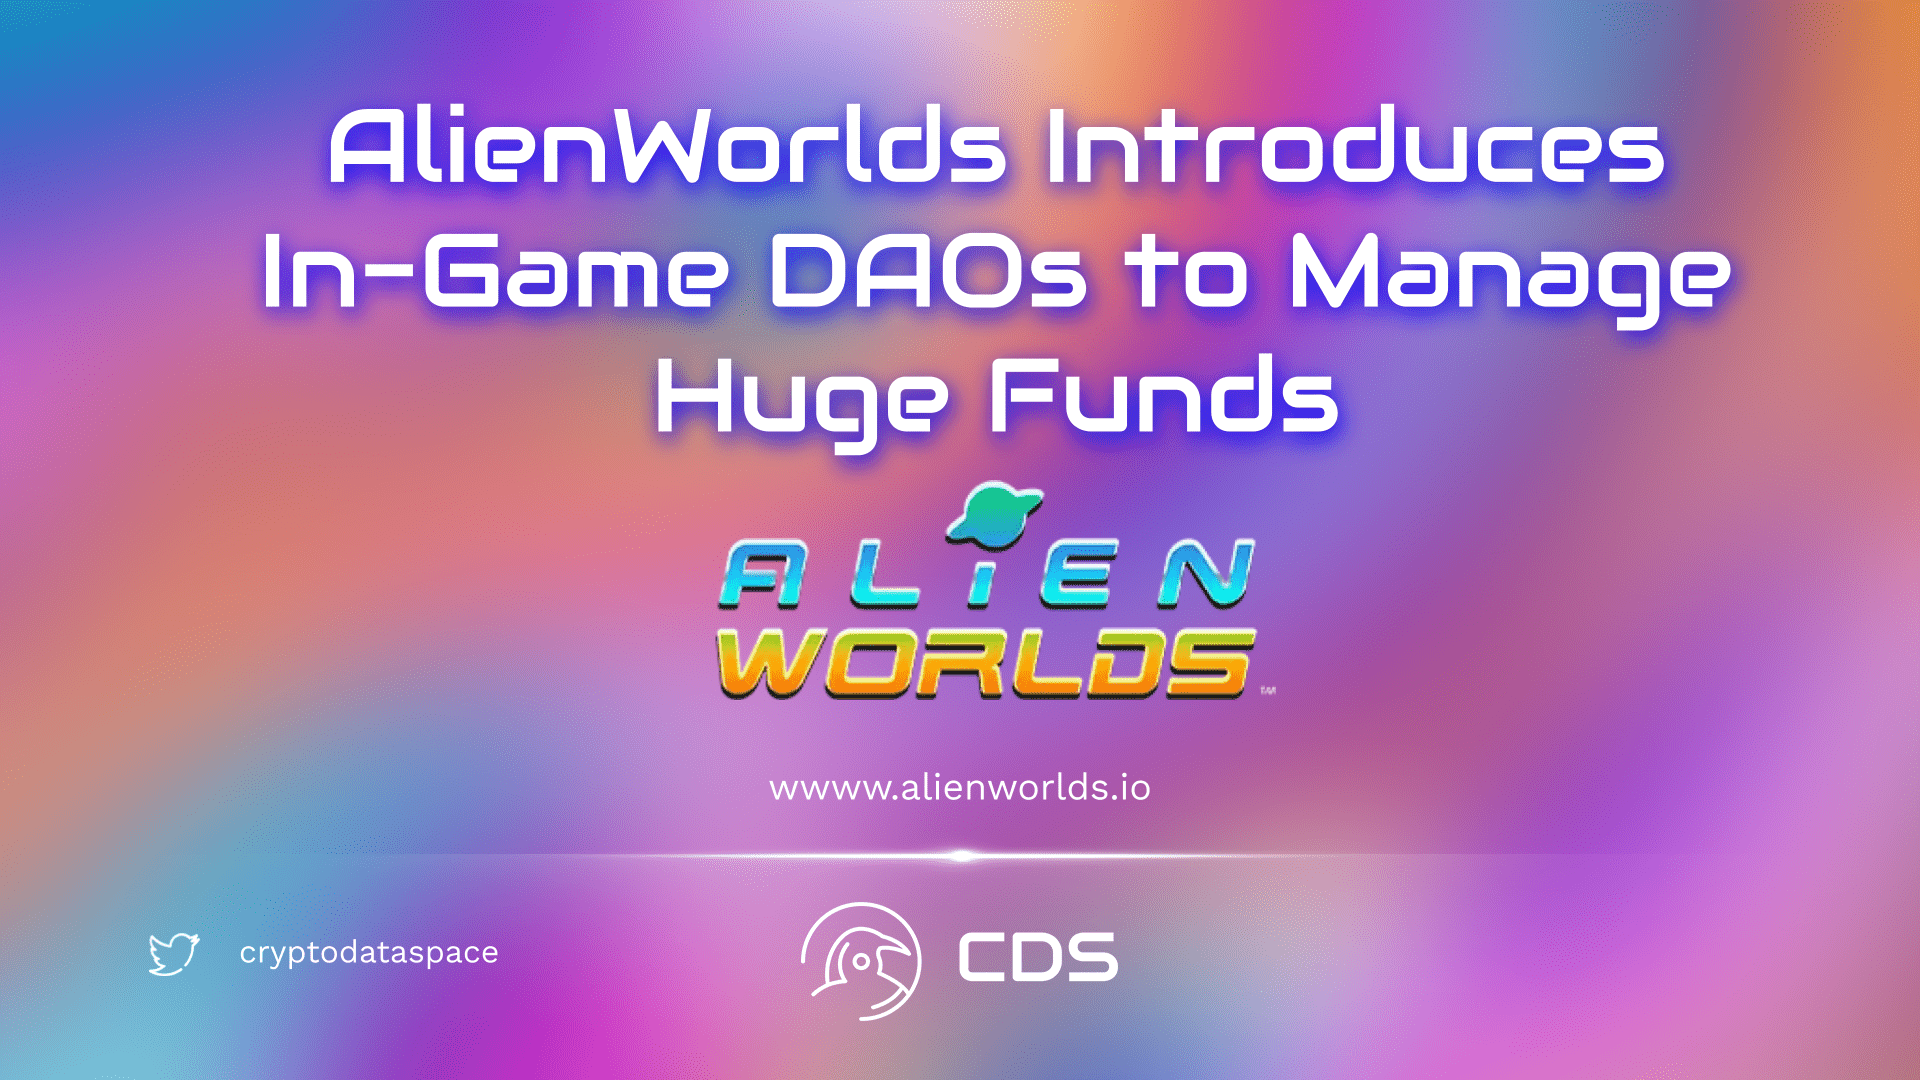 AlienWorlds Introduces In-Game DAOs to Manage Huge Funds